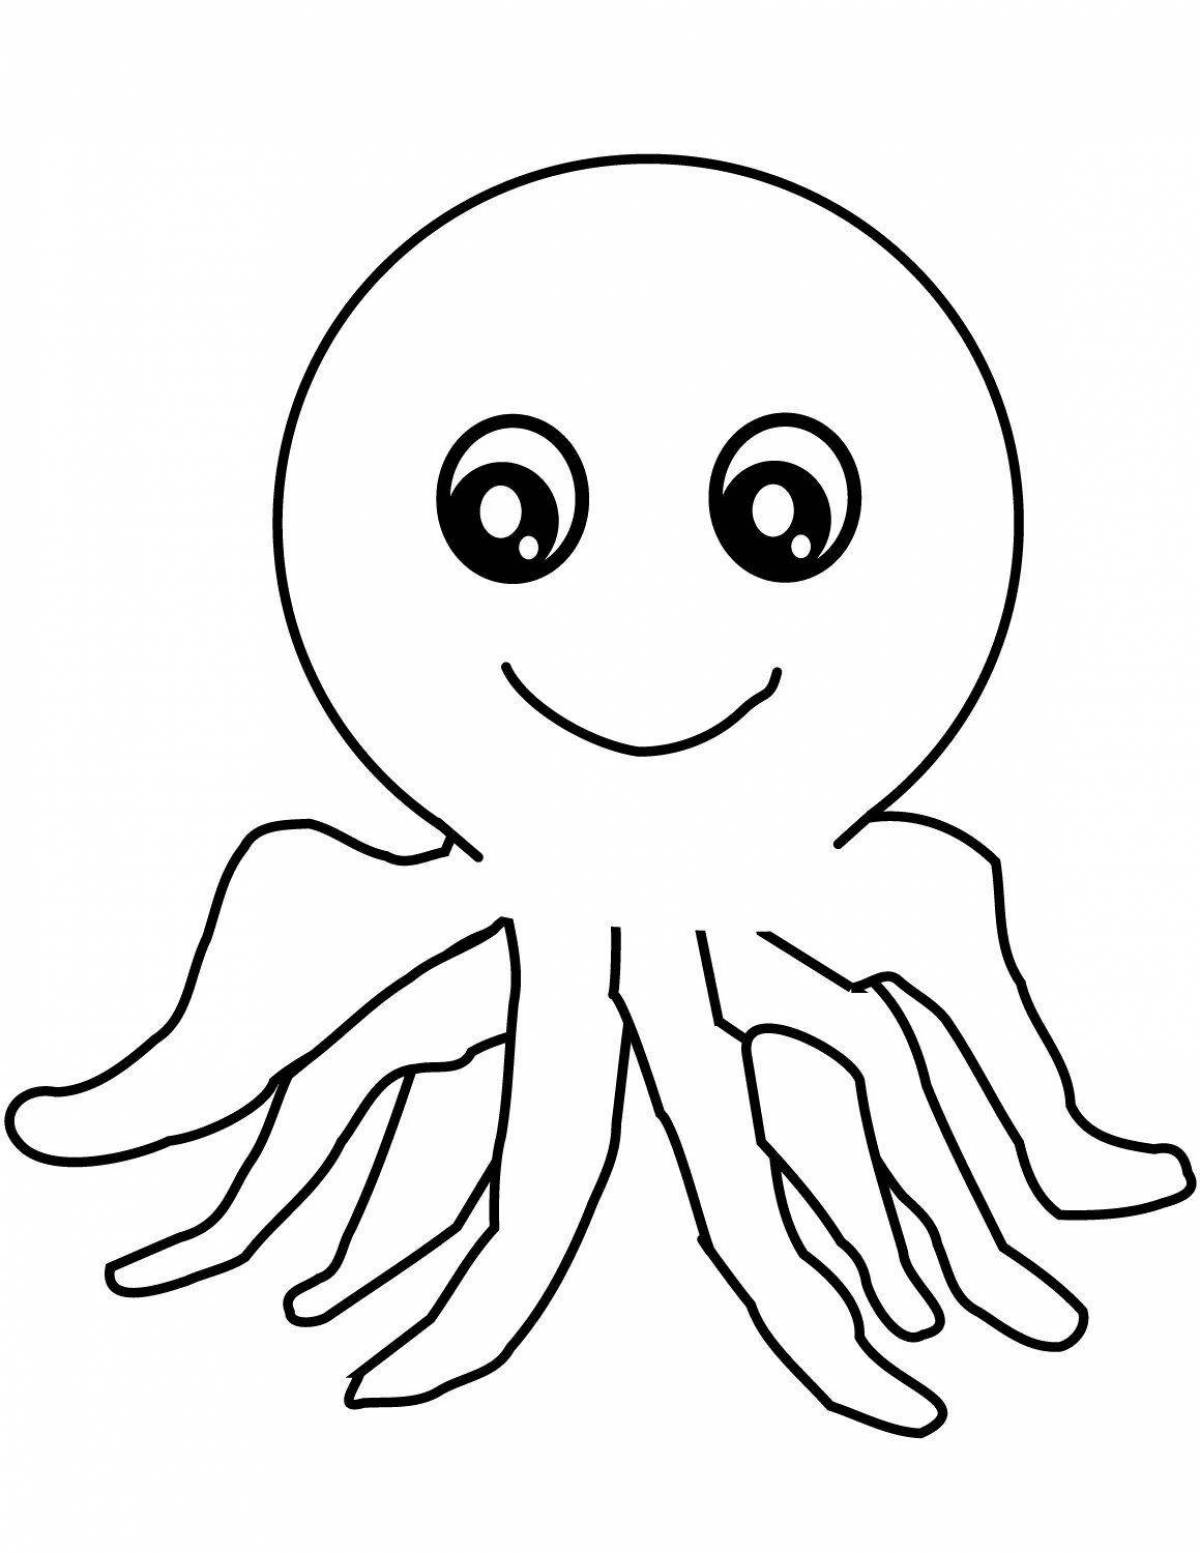 Mysterious octopus coloring page